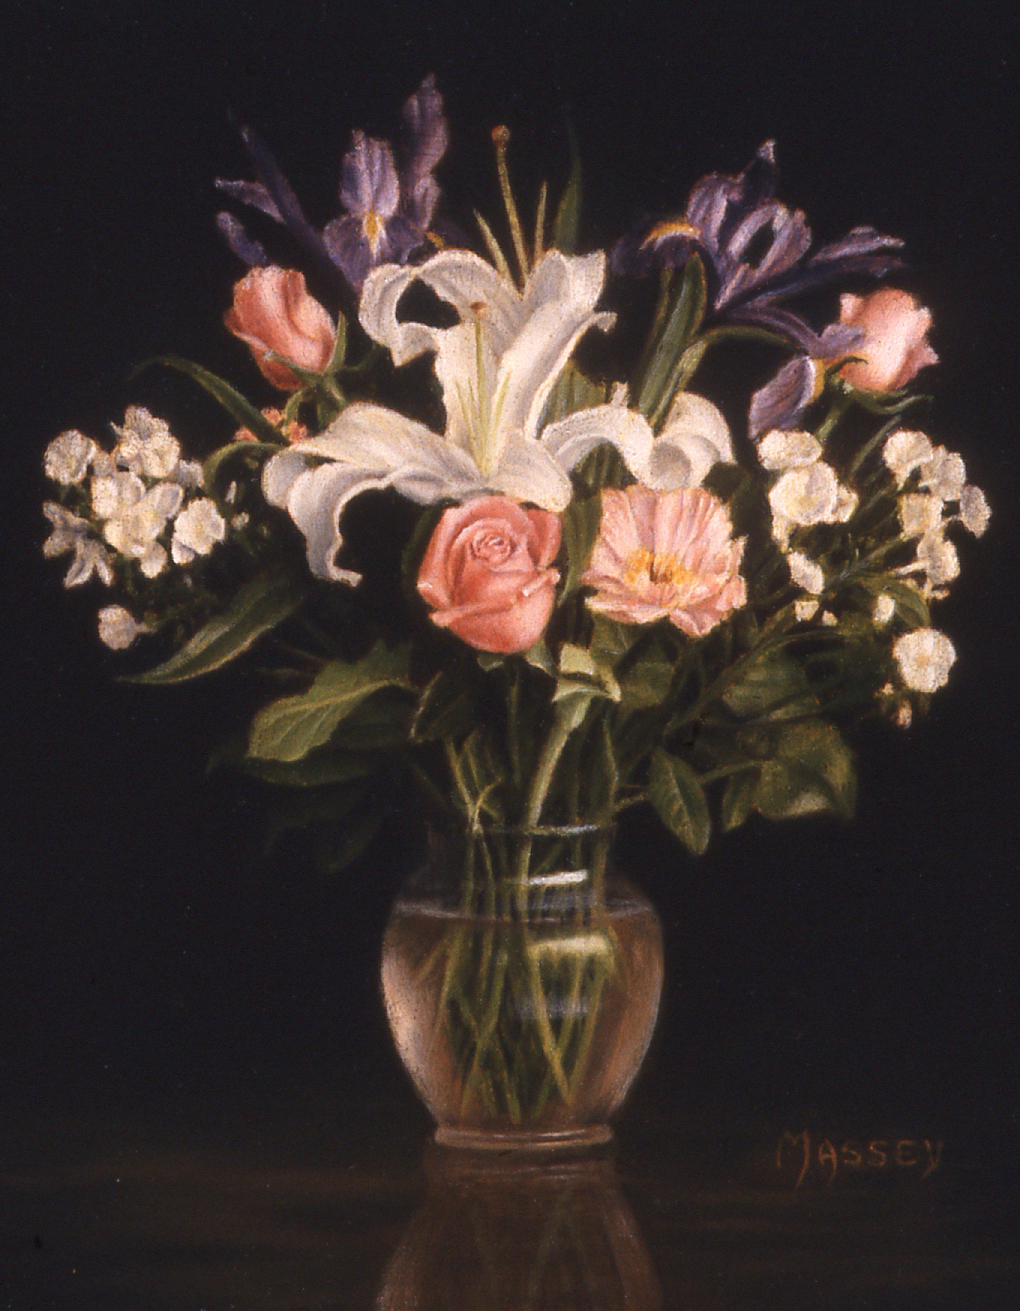 In Memoriam © 2001 Ann James Massey
5in x 4in / 12.7cm x 10.16cm
Oil on mahogany board
Collection of Susan & Paul Niehans